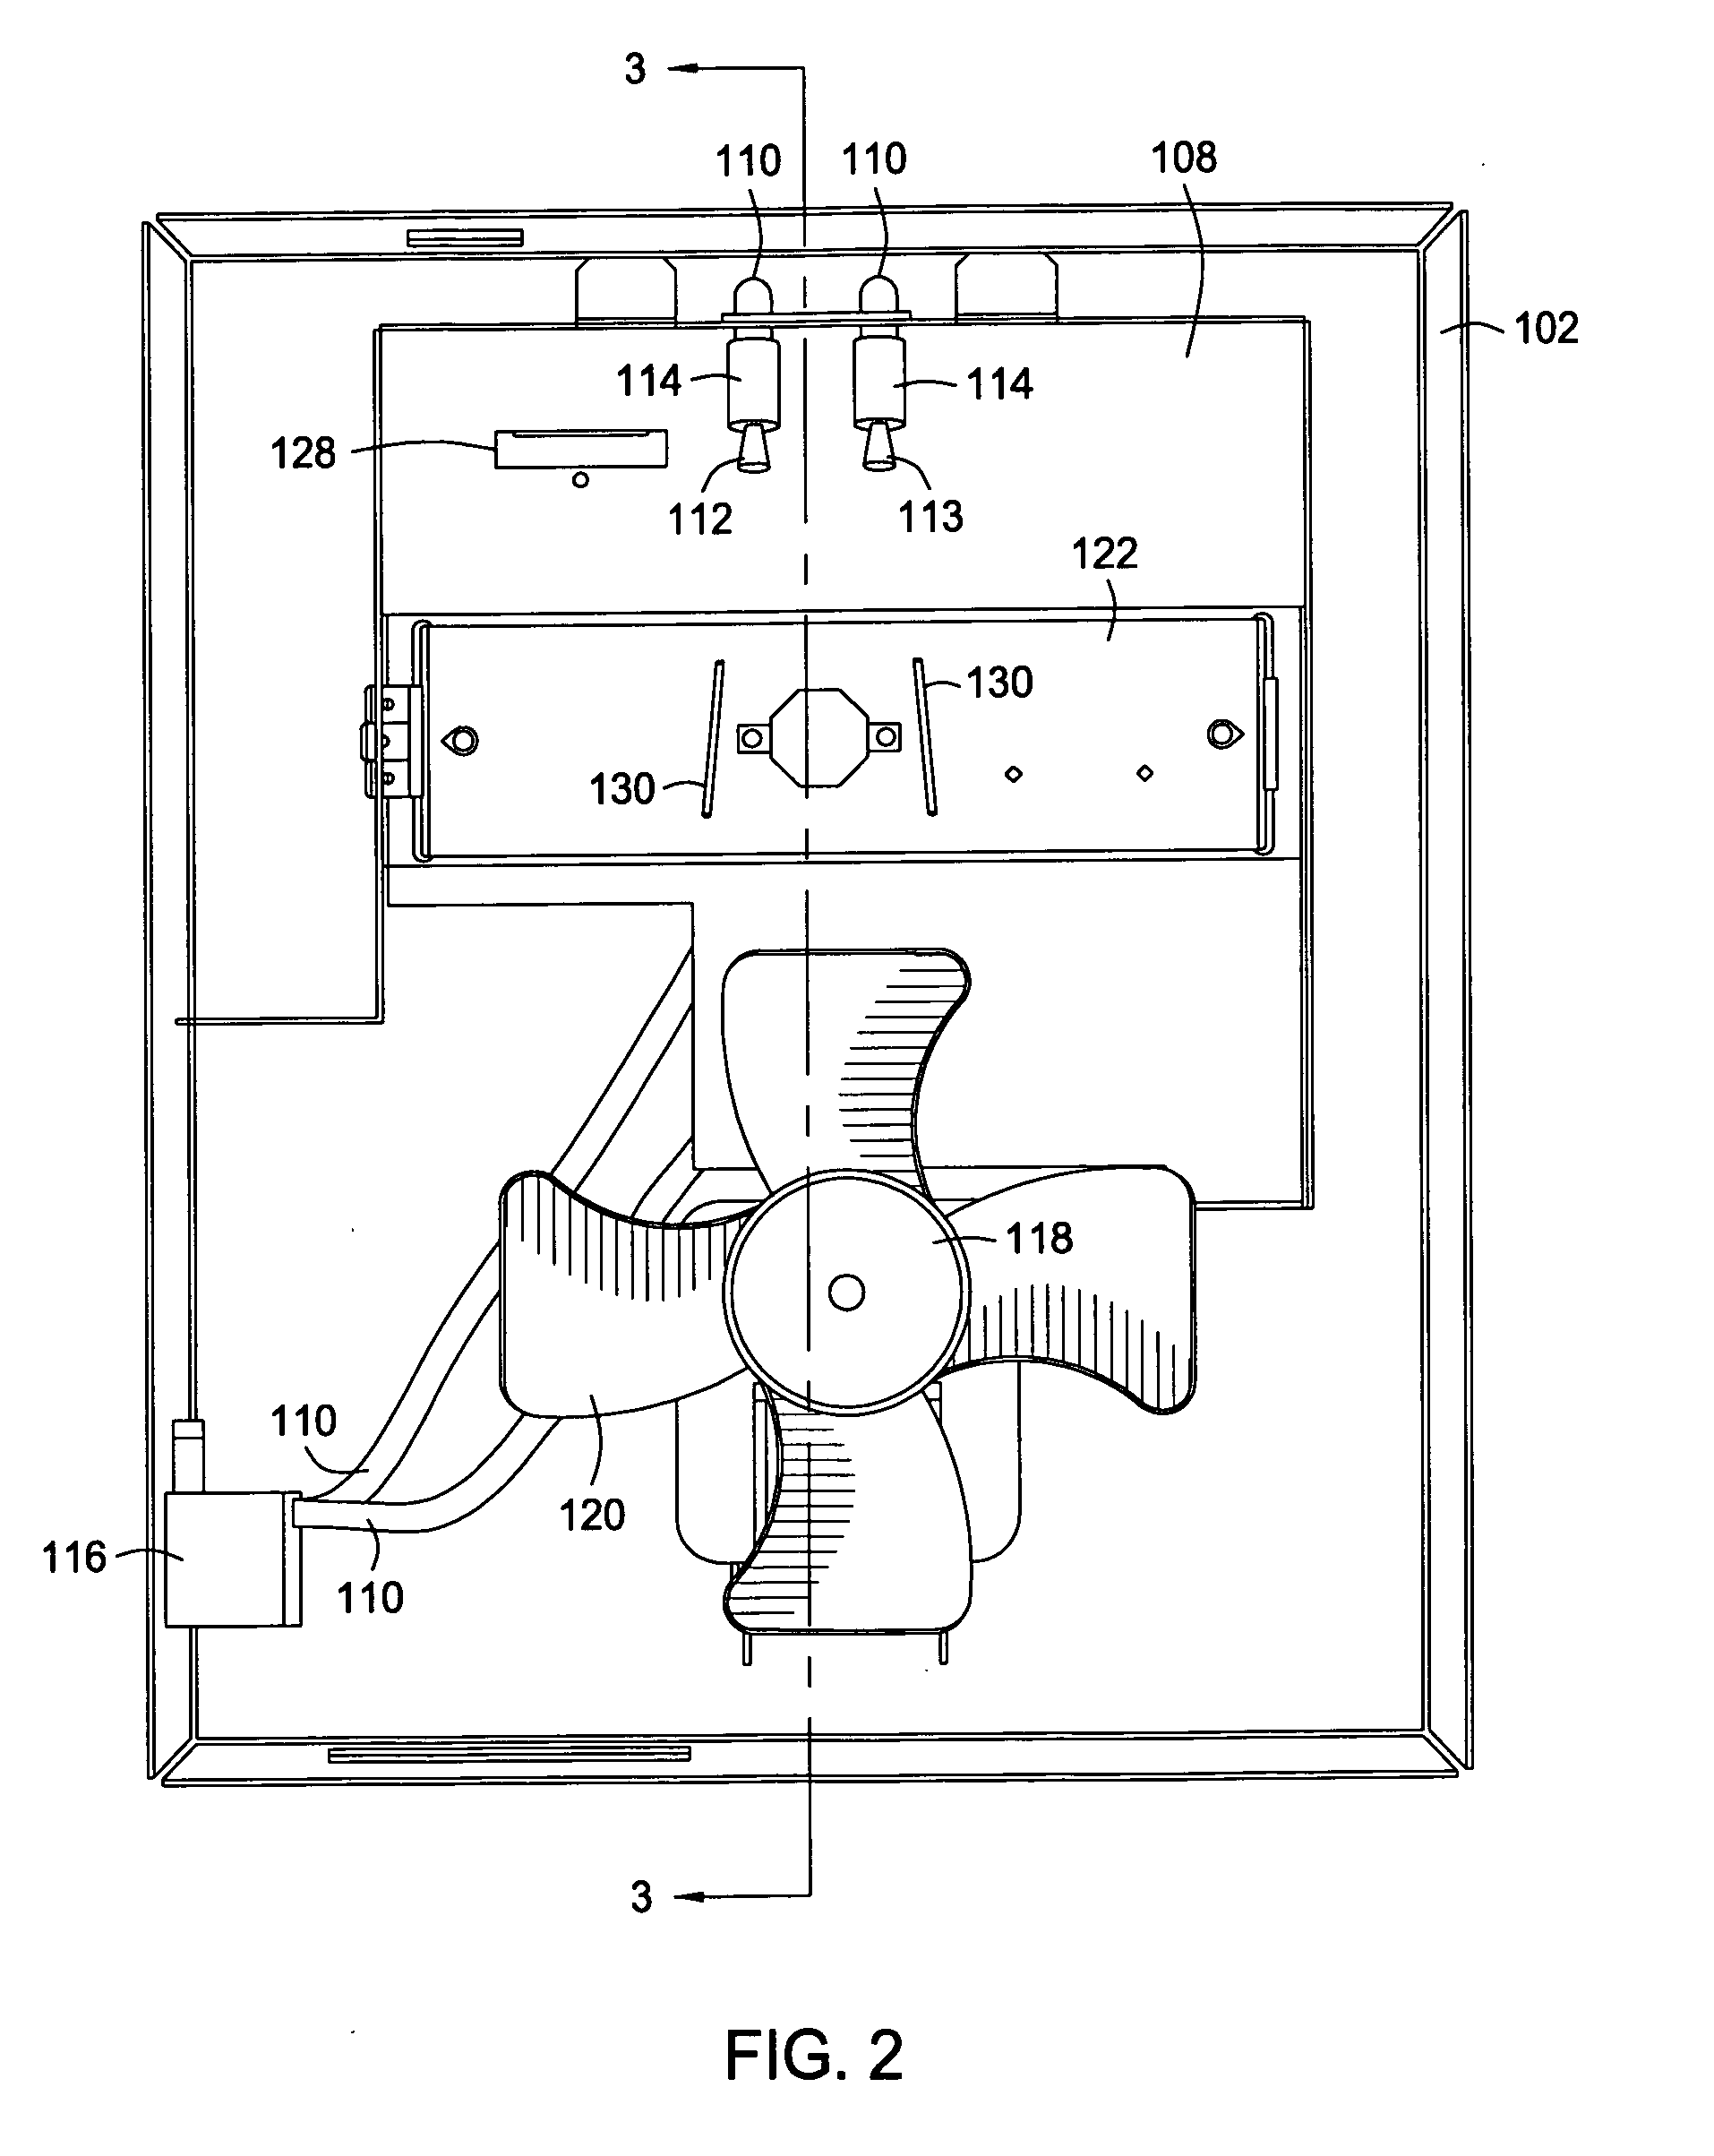 Fan forced electric unit that incorporates a low power cold plasma generator and method of making same